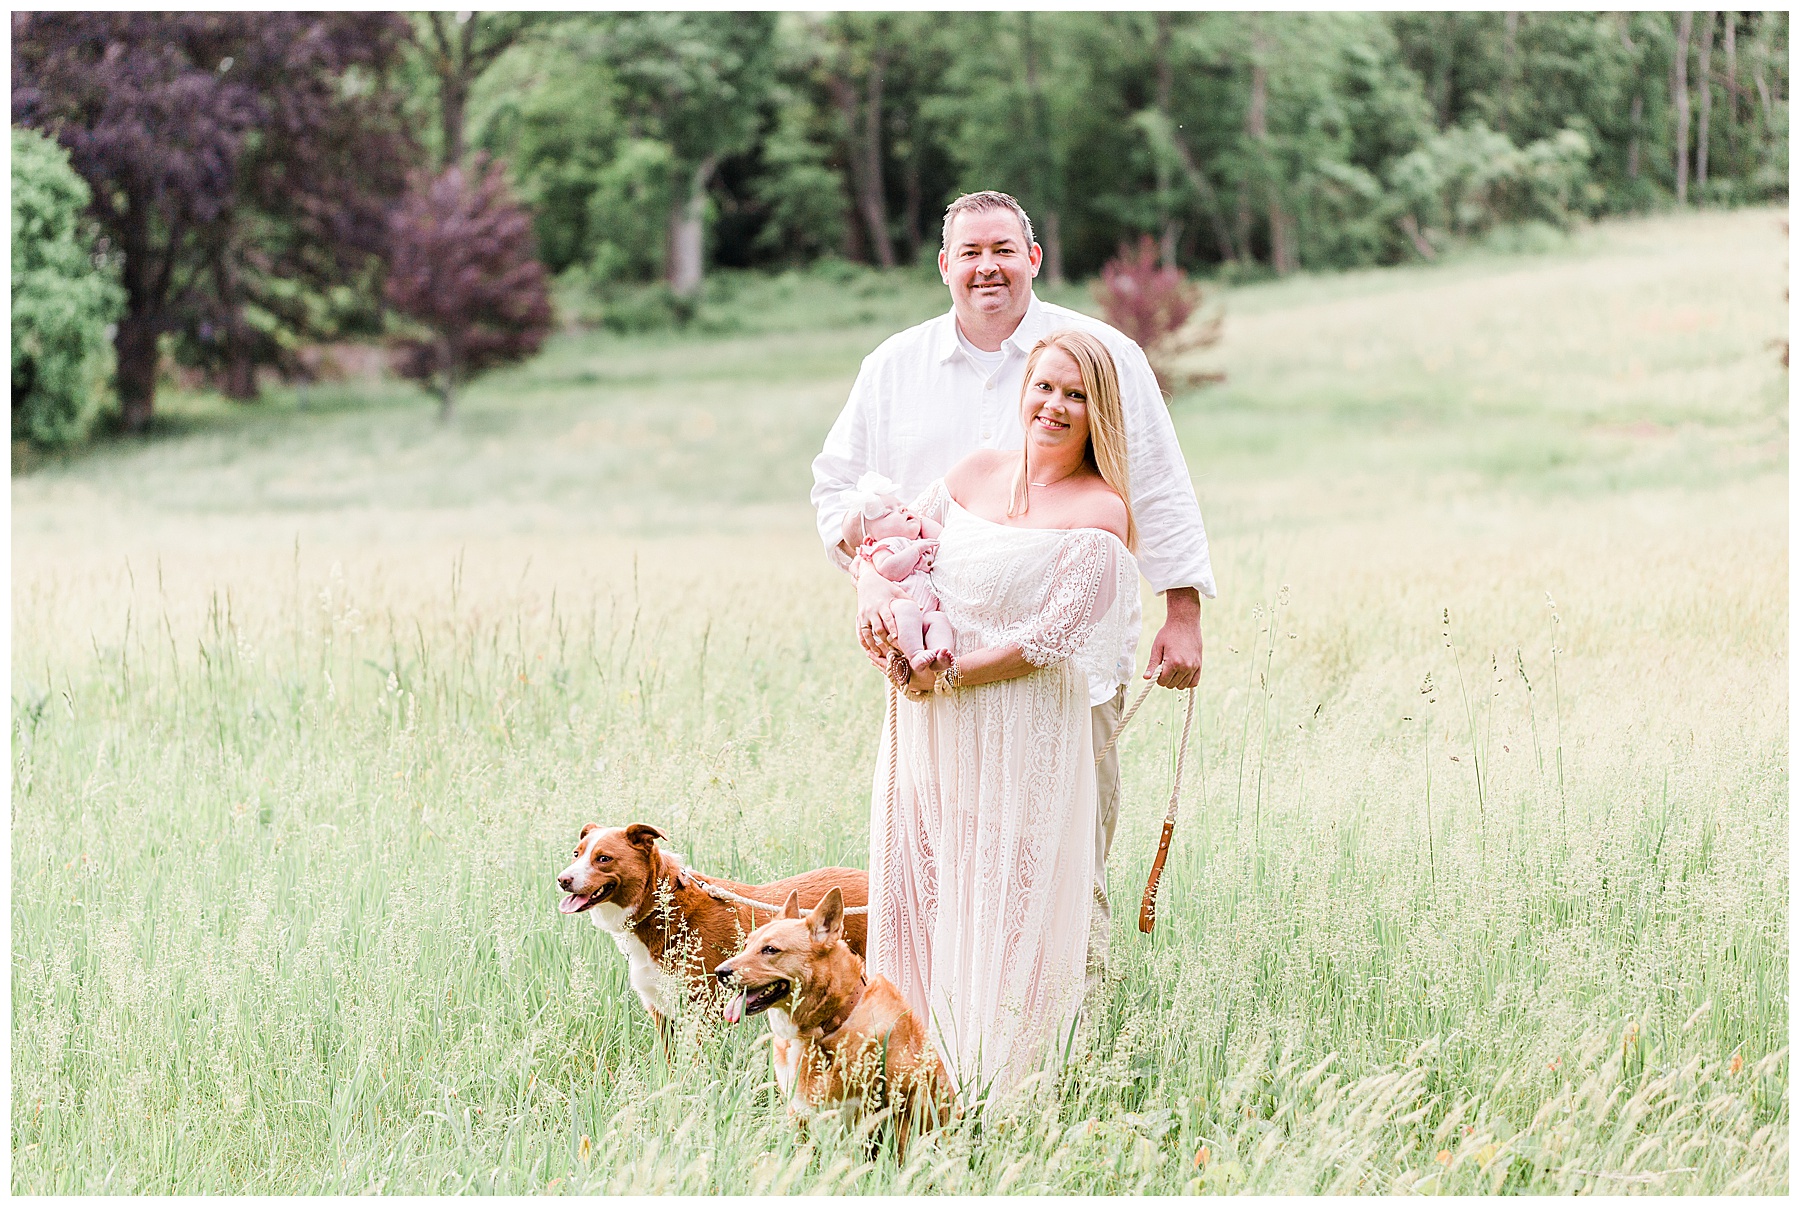 Mom-and-dad-standing-in-field-with-dogs-and-baby